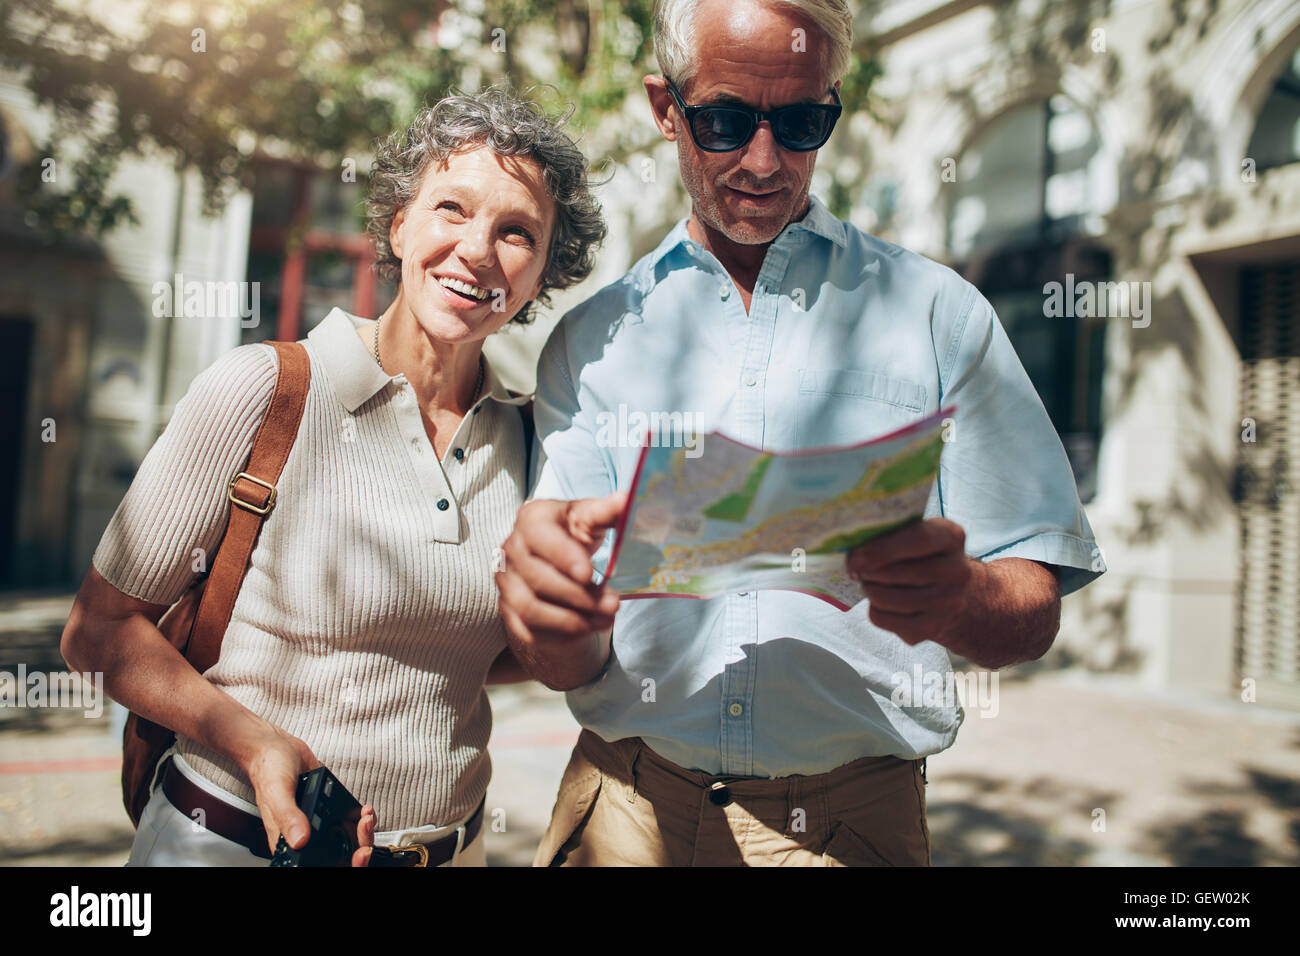 Portrait of senior tourist couple in town using a map. Mature man and woman using map while sightseeing. Stock Photo